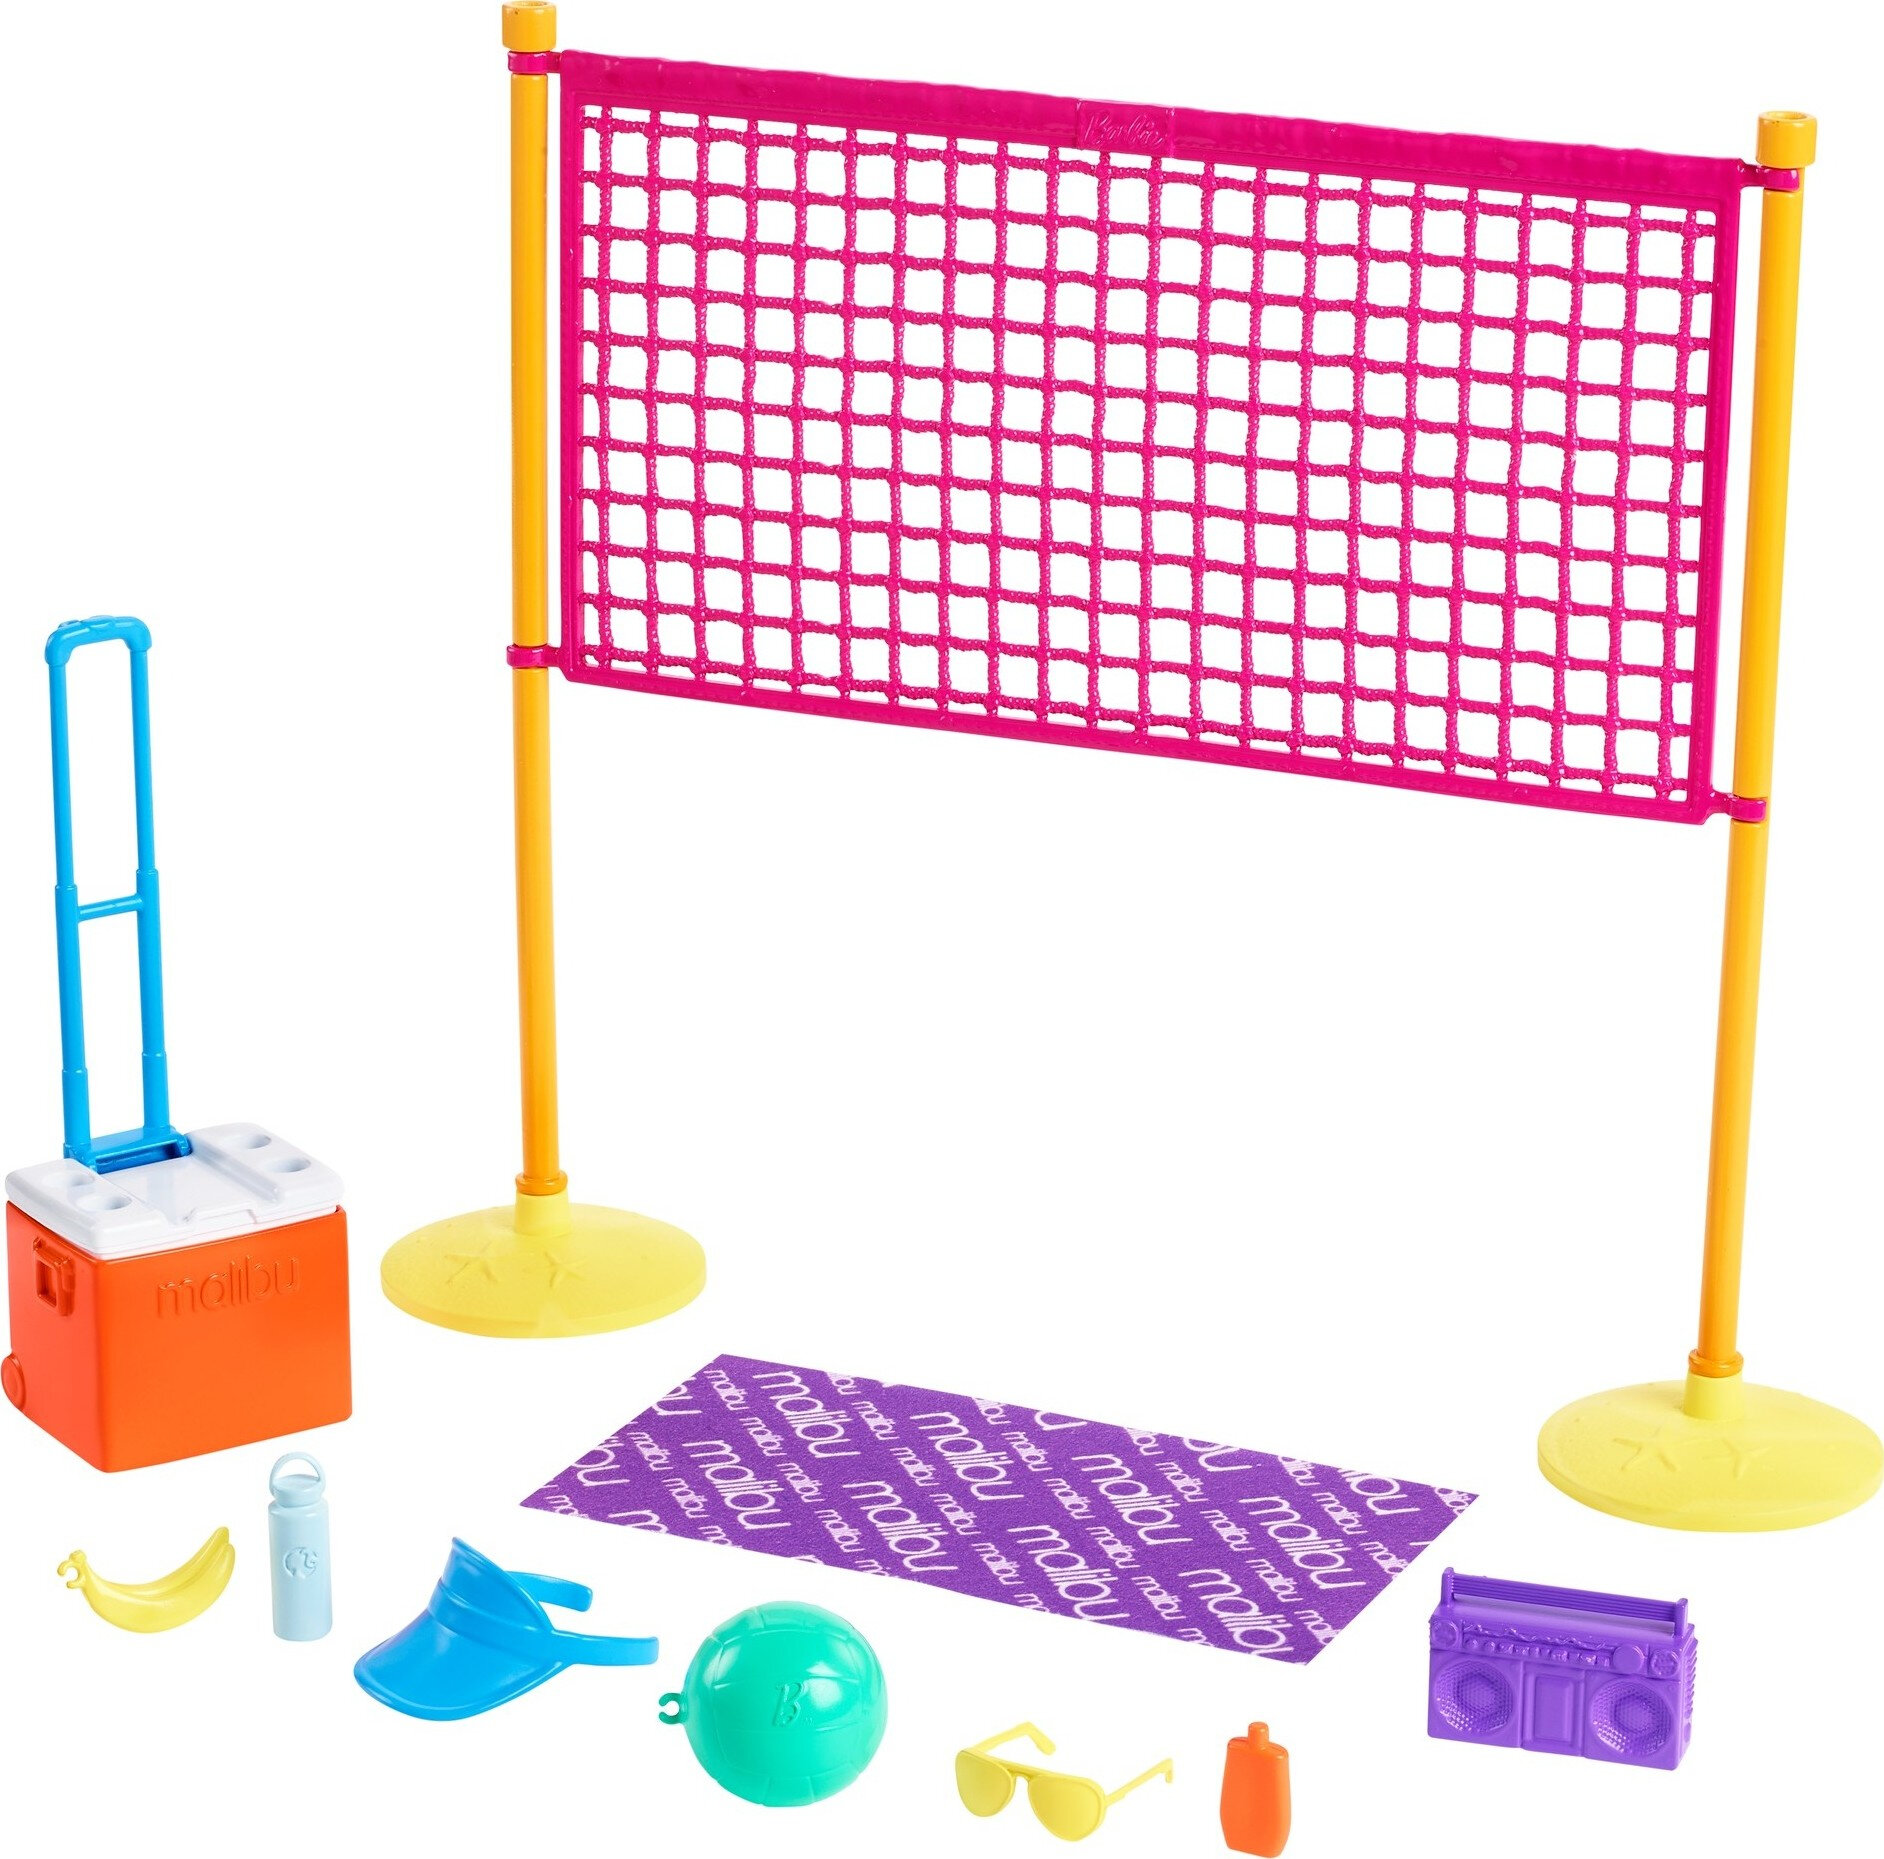 Barbie Loves the Ocean Beach Volleyball-Themed Playset, Made from Recycled Plastics - Walmart.com - Walmart.com $6.37